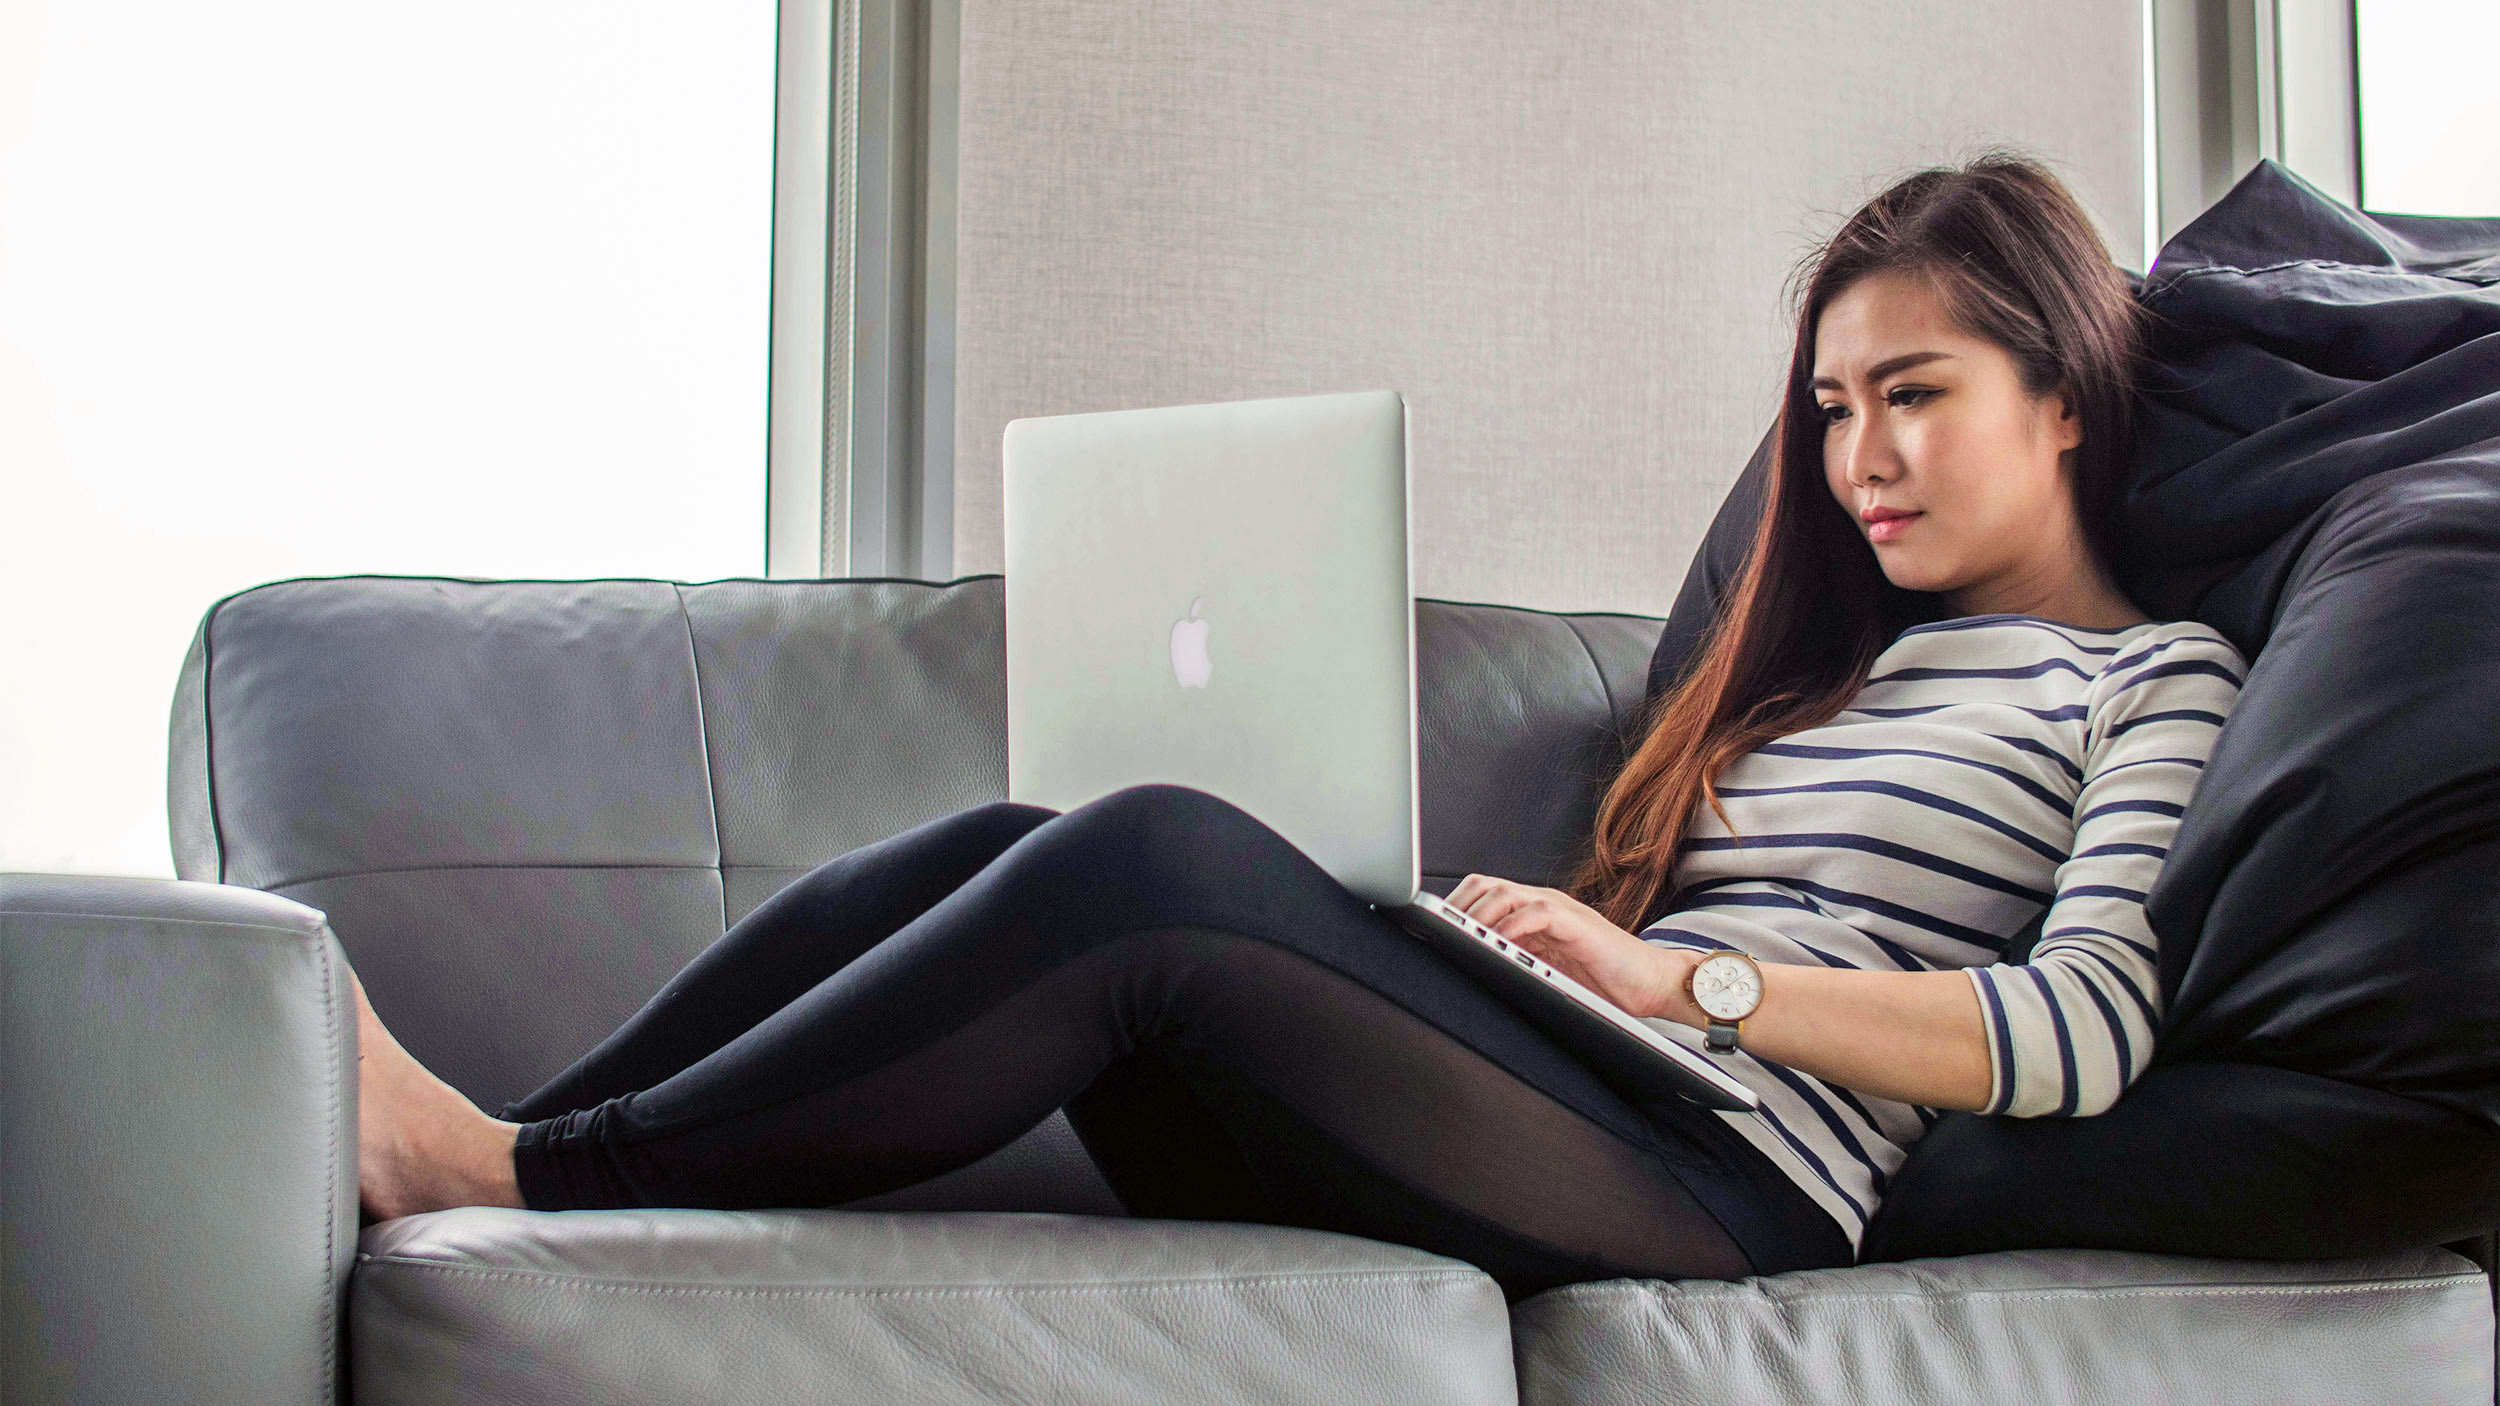 student sits on the couch looking at an open laptop on their lap